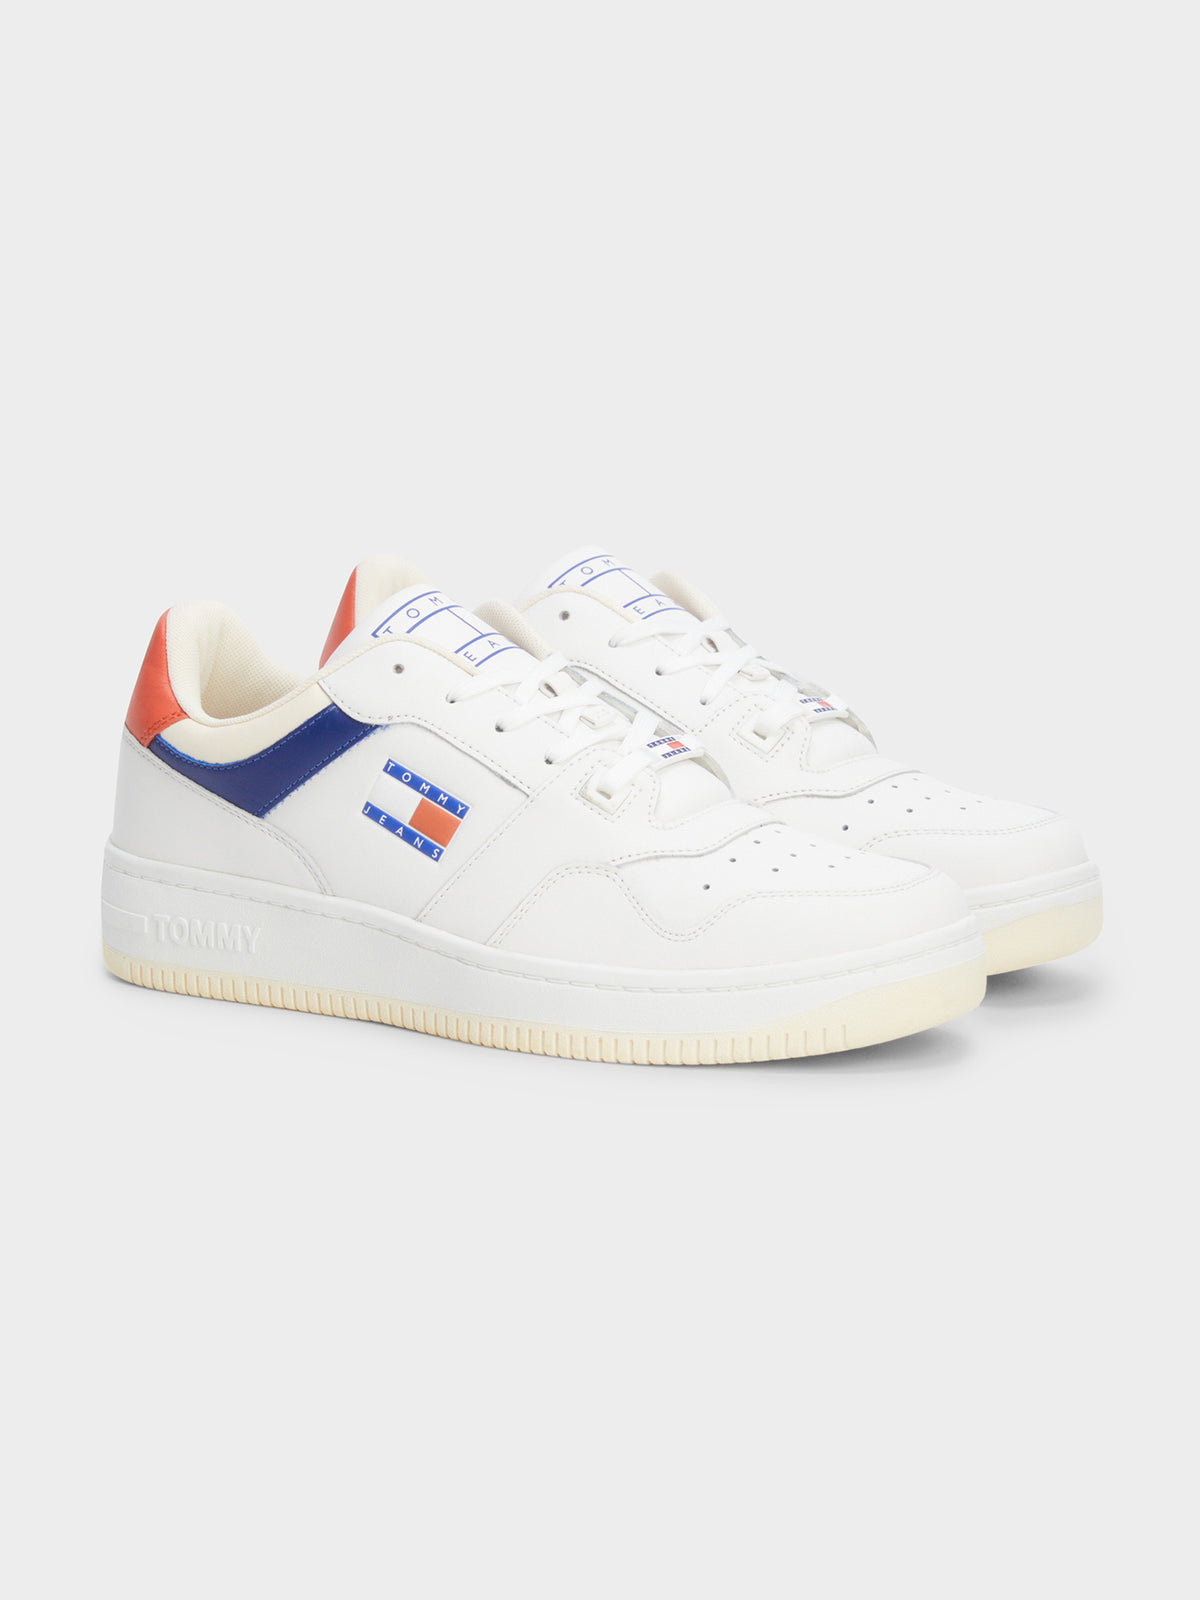 Mens Premium Leather Colour-blocked Basketball Trainers in White